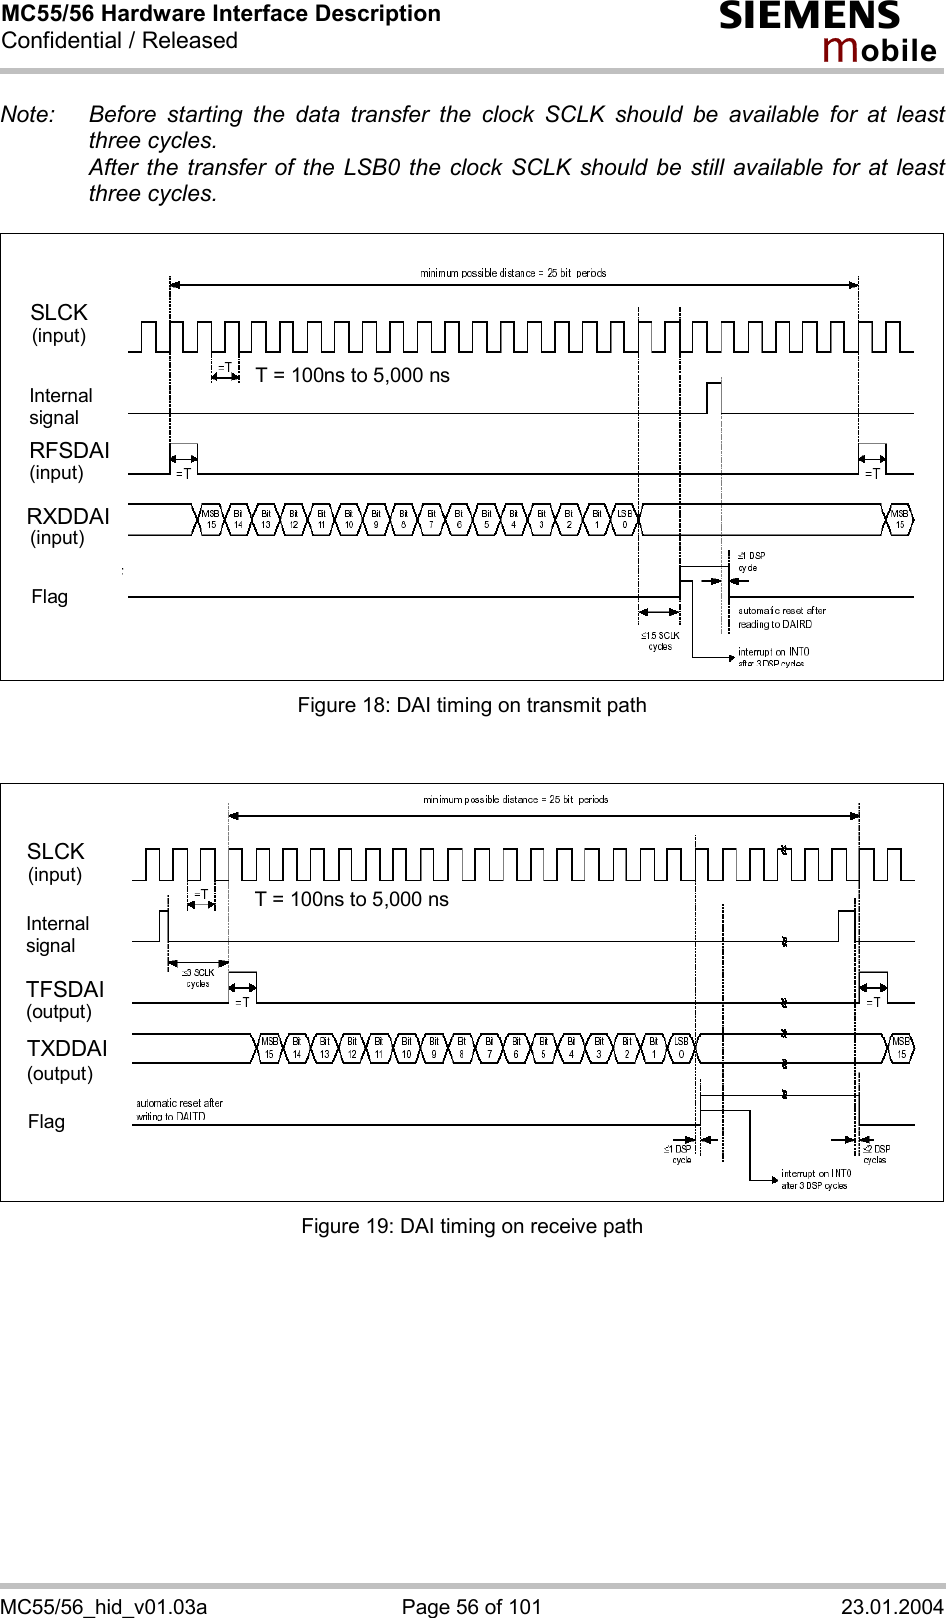 MC55/56 Hardware Interface Description Confidential / Released s mo b i l e MC55/56_hid_v01.03a  Page 56 of 101  23.01.2004 Note:  Before starting the data transfer the clock SCLK should be available for at least three cycles.   After the transfer of the LSB0 the clock SCLK should be still available for at least three cycles.  SLCKRFSDAIRXDDAI(input)Internalsignal(input)(input)FlagT = 100ns to 5,000 ns Figure 18: DAI timing on transmit path   SLCKTFSDAITXDDAI(input)Internalsignal(output)(output)FlagT = 100ns to 5,000 ns Figure 19: DAI timing on receive path   